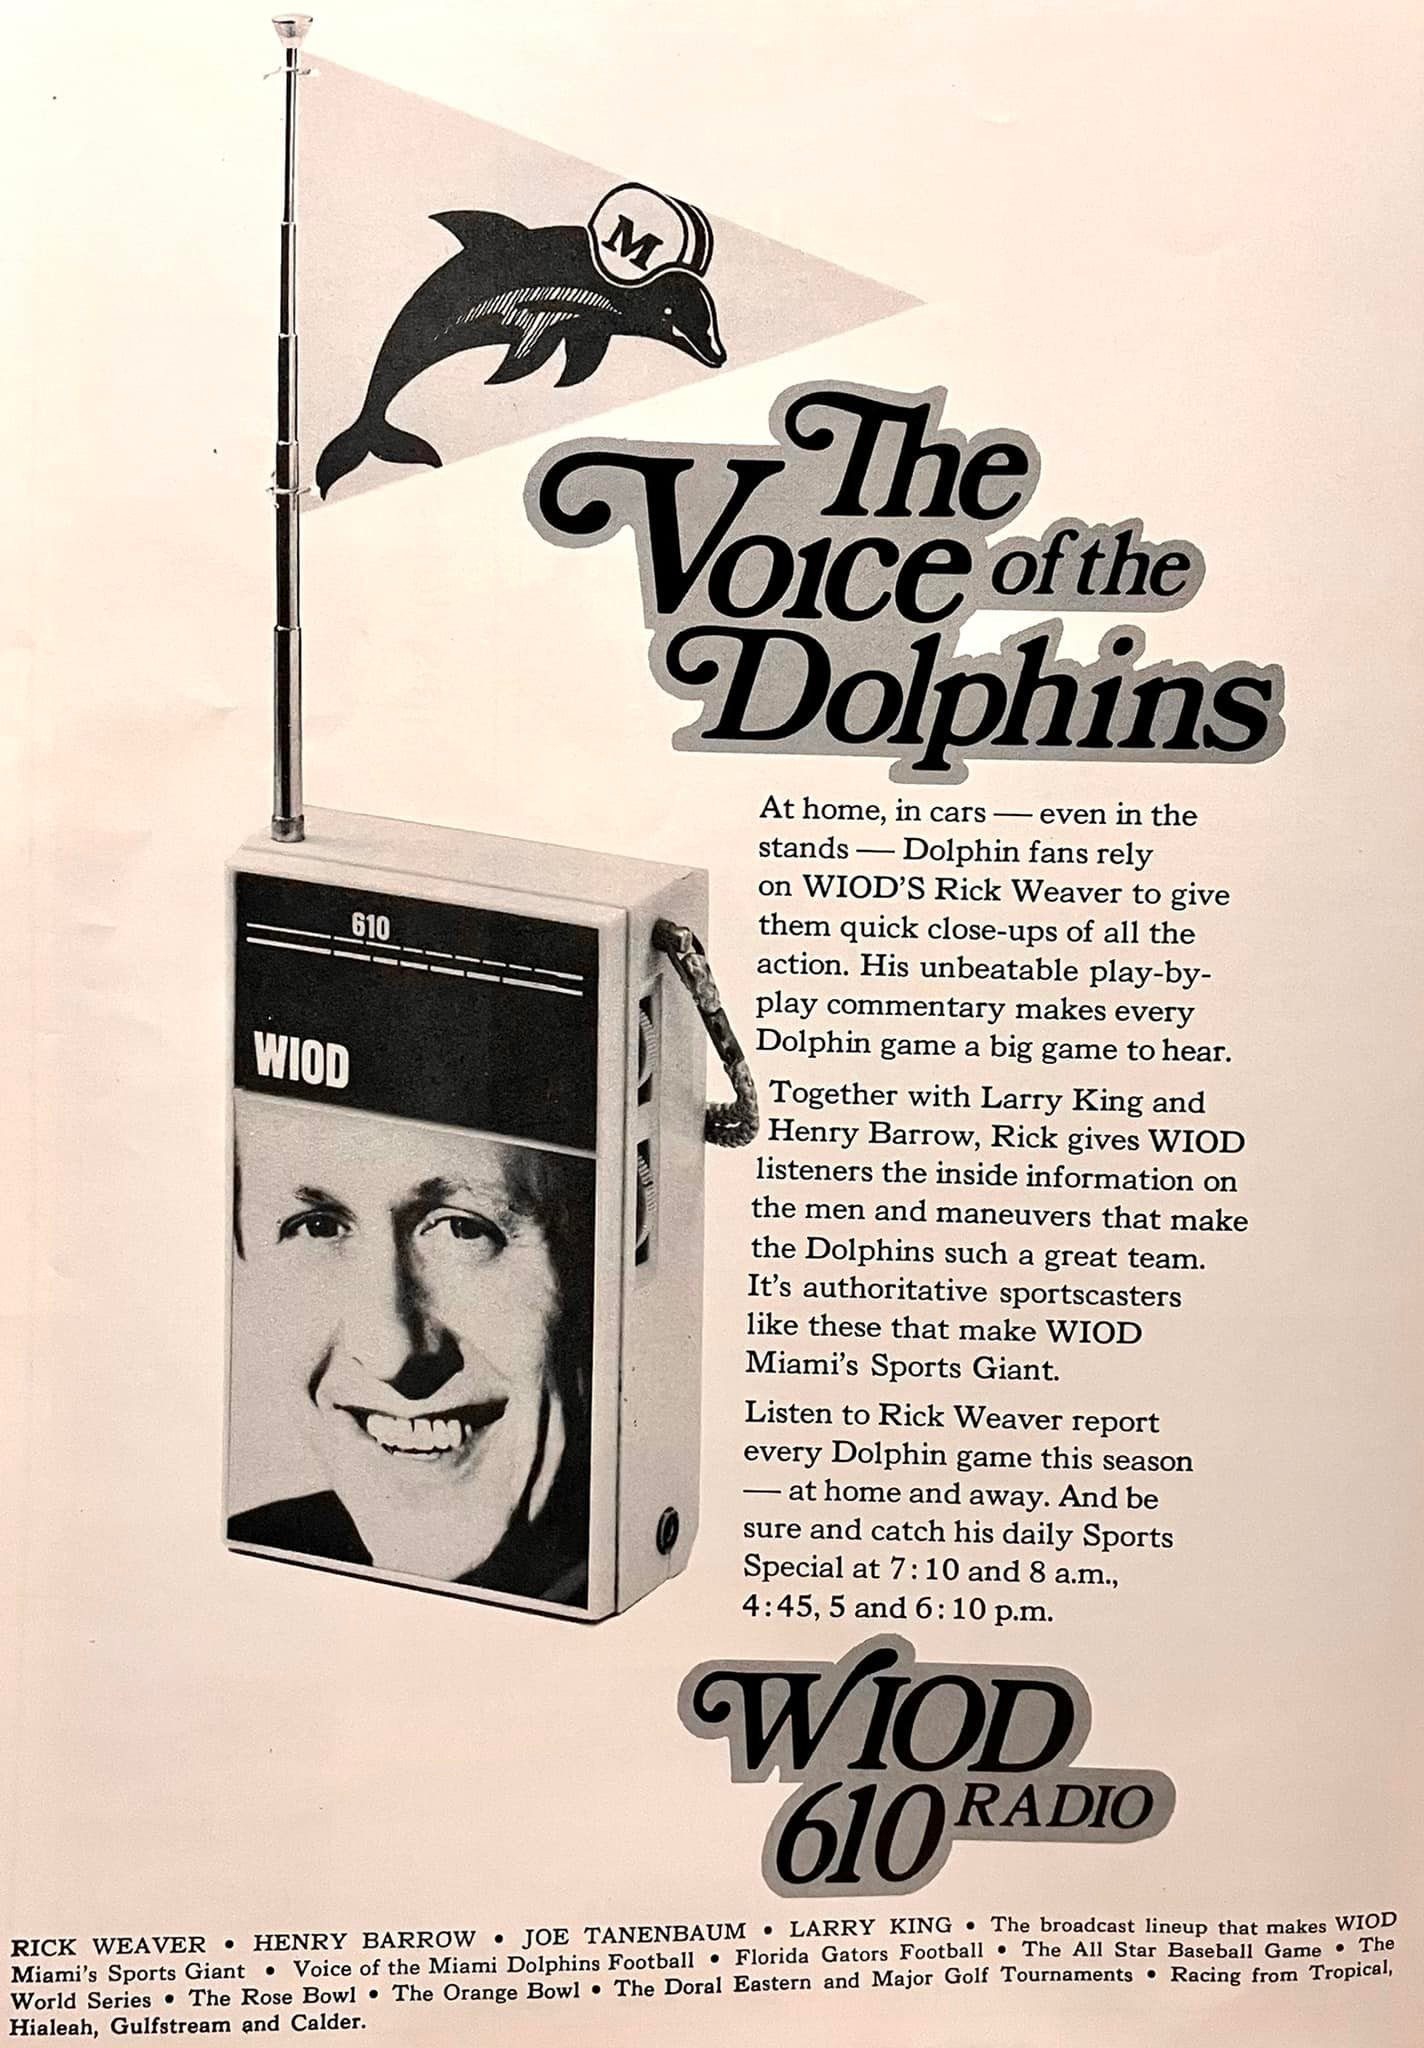 Remembering Rick Weaver: The Voice of the Dolphins